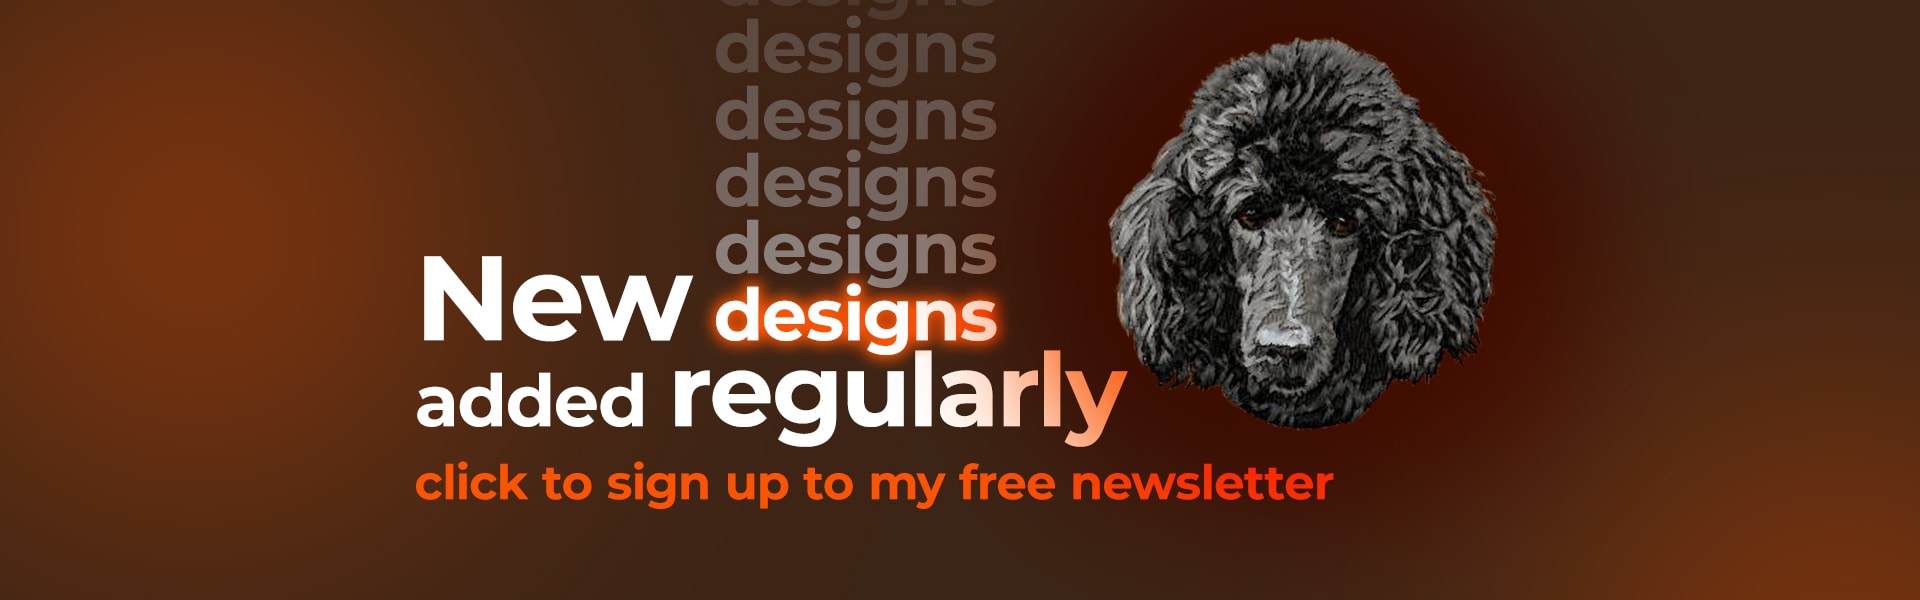 New designs added regularly. Click to sign up to my free newsletter